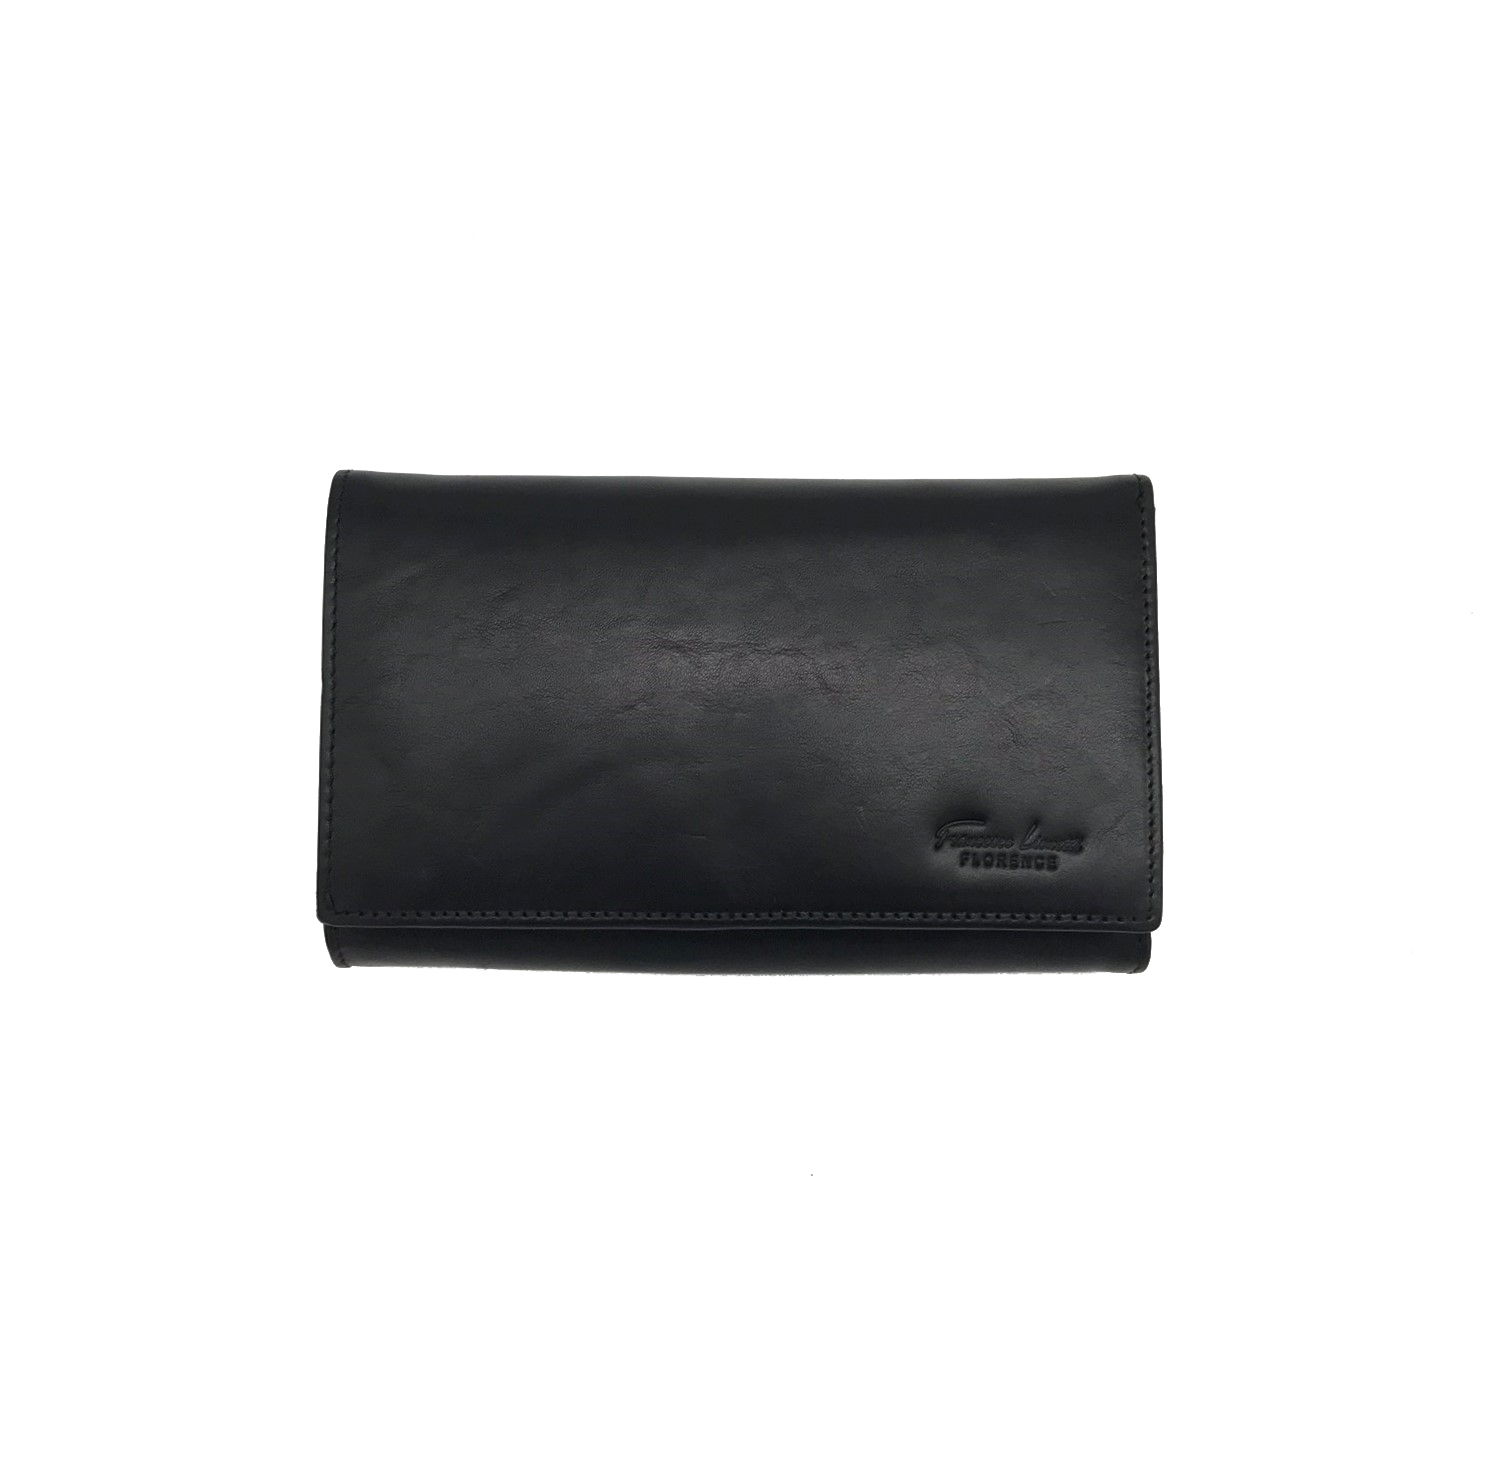 Leather Wallet Made in Italy PL0013 - Francesco Lionetti